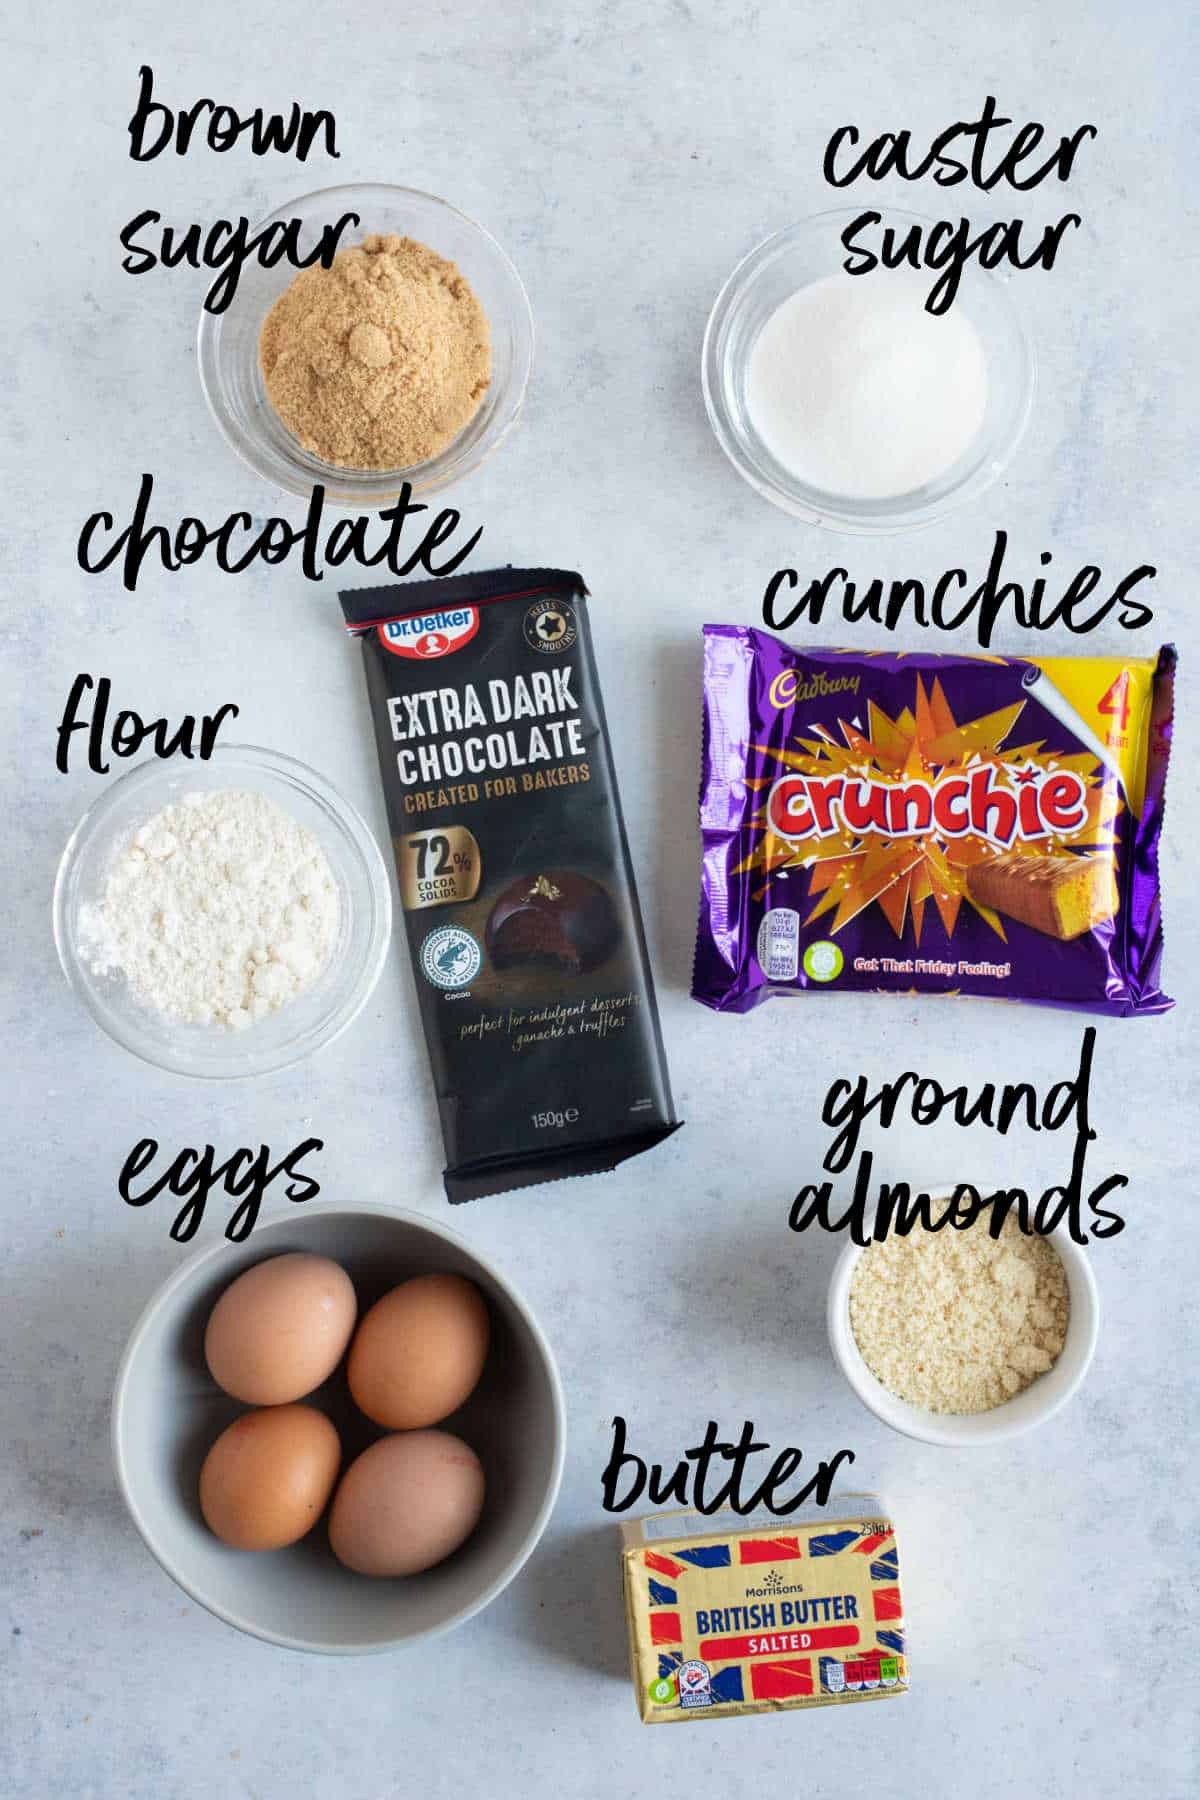 Ingredients for chocolate honeycomb torte.